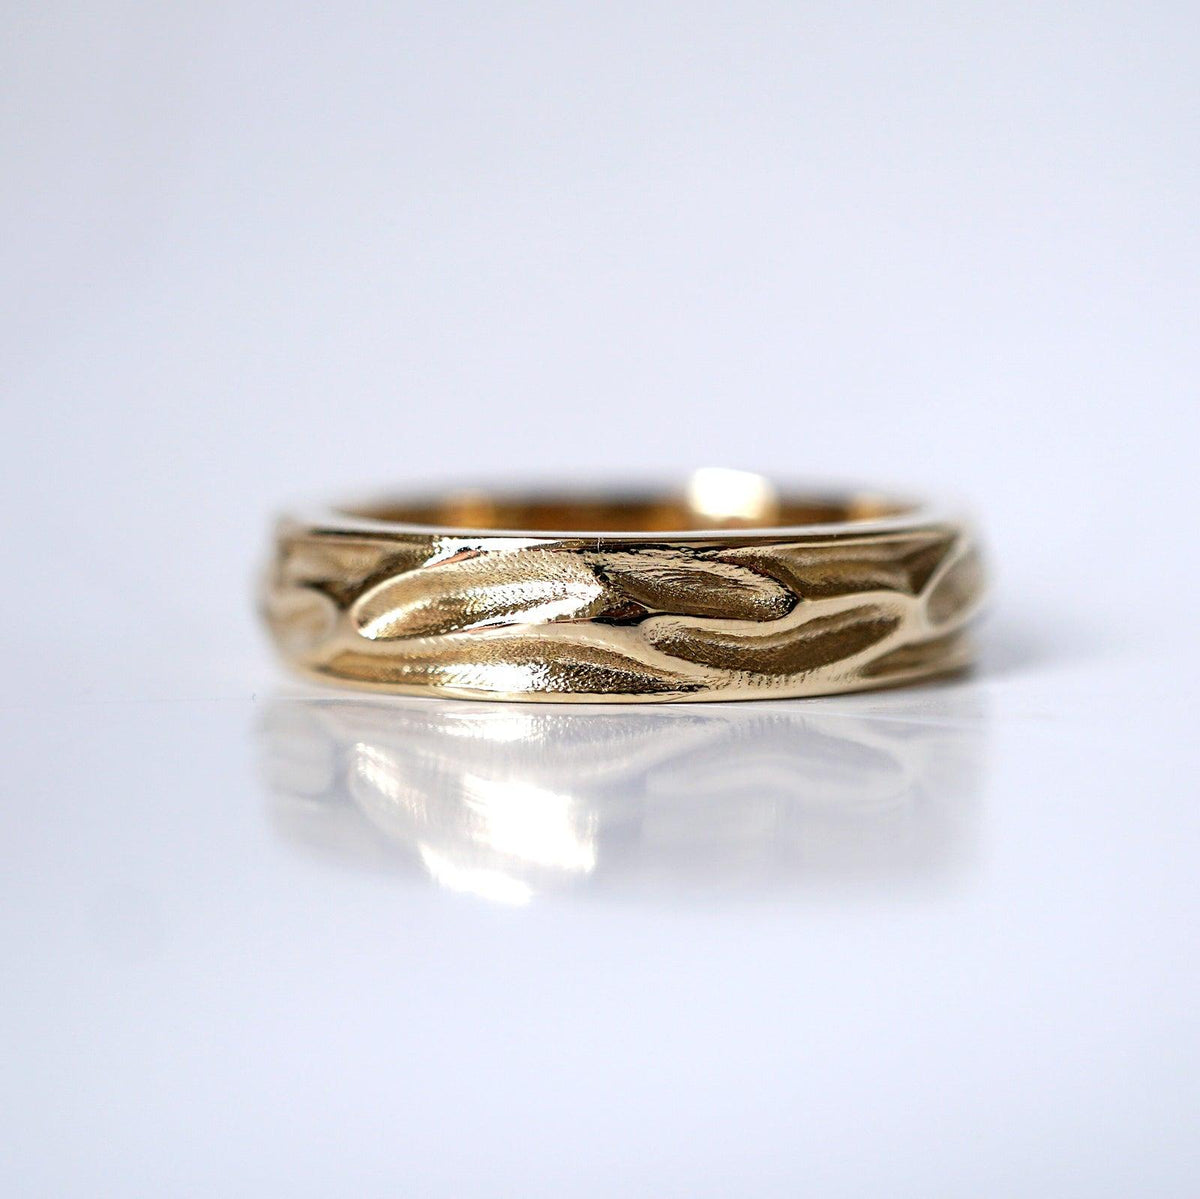 Liquid Ring in Sterling Silver and 14K Gold, 5mm - Tippy Taste Jewelry